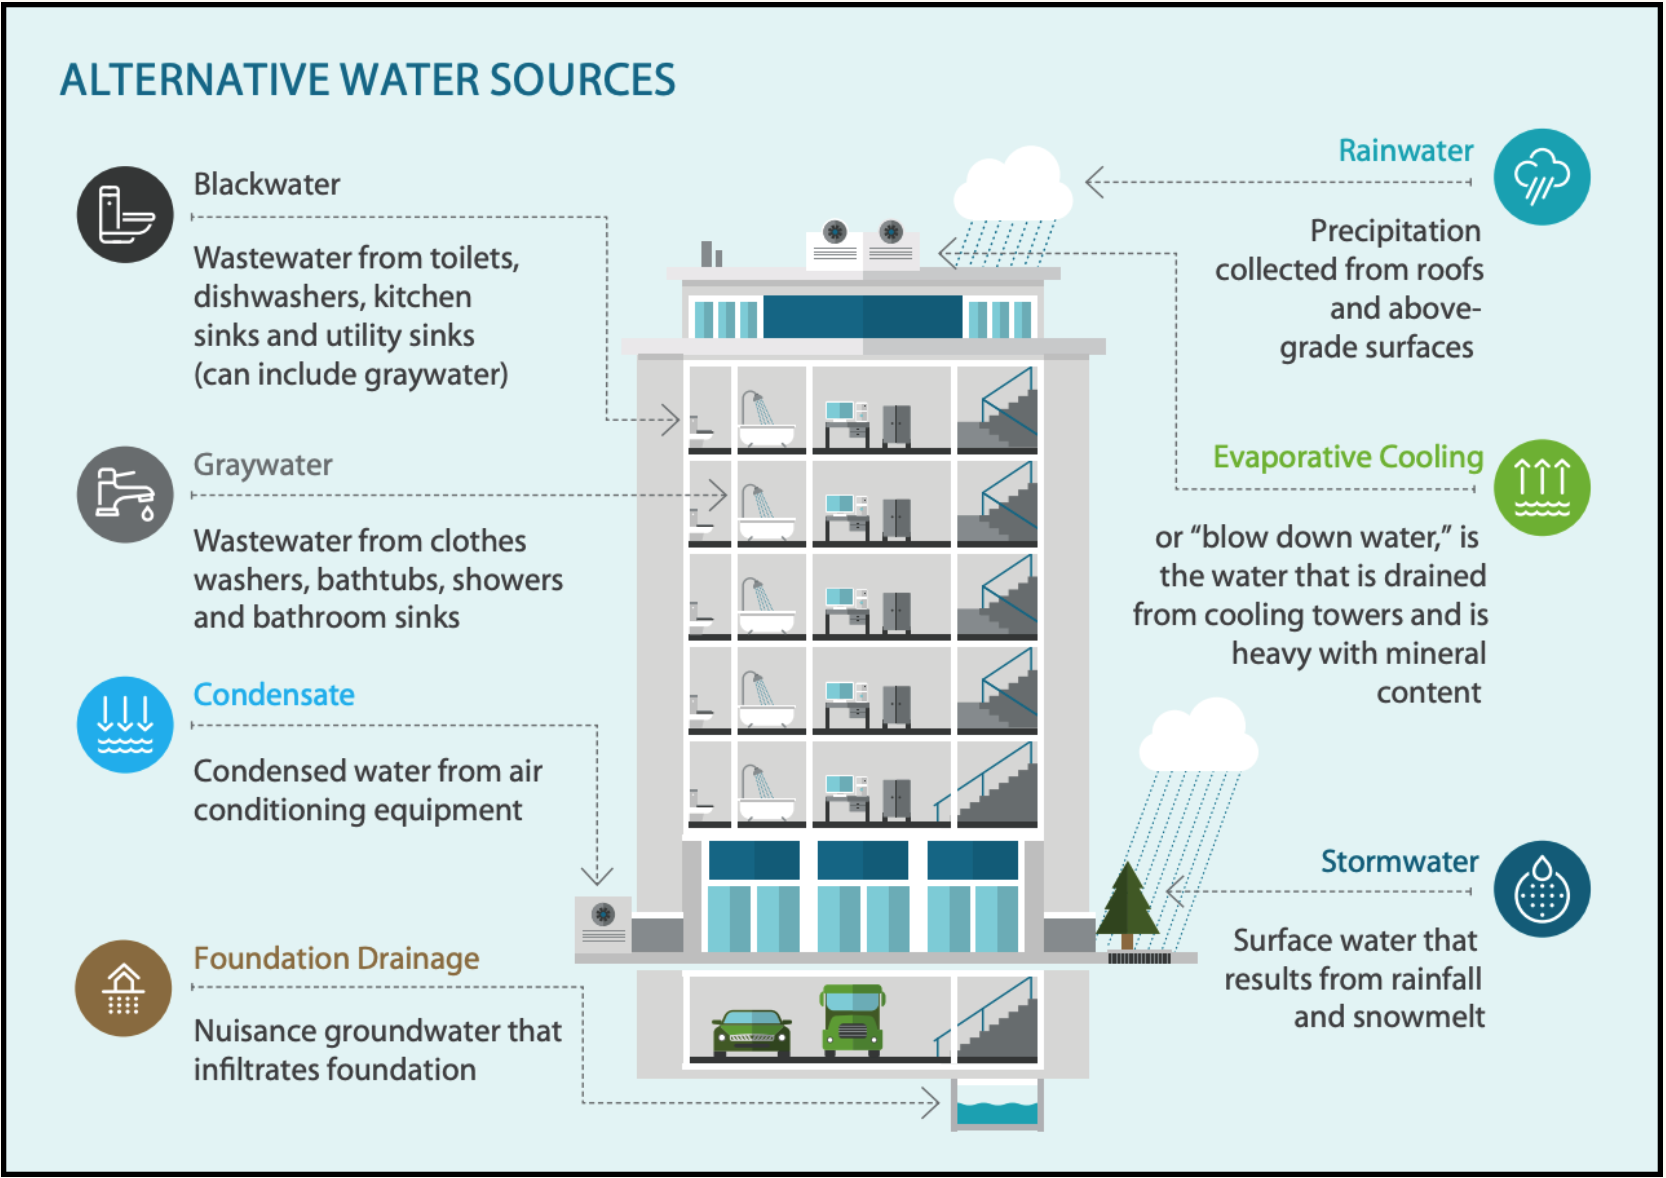 Alternative water sources available in a typical urban building.